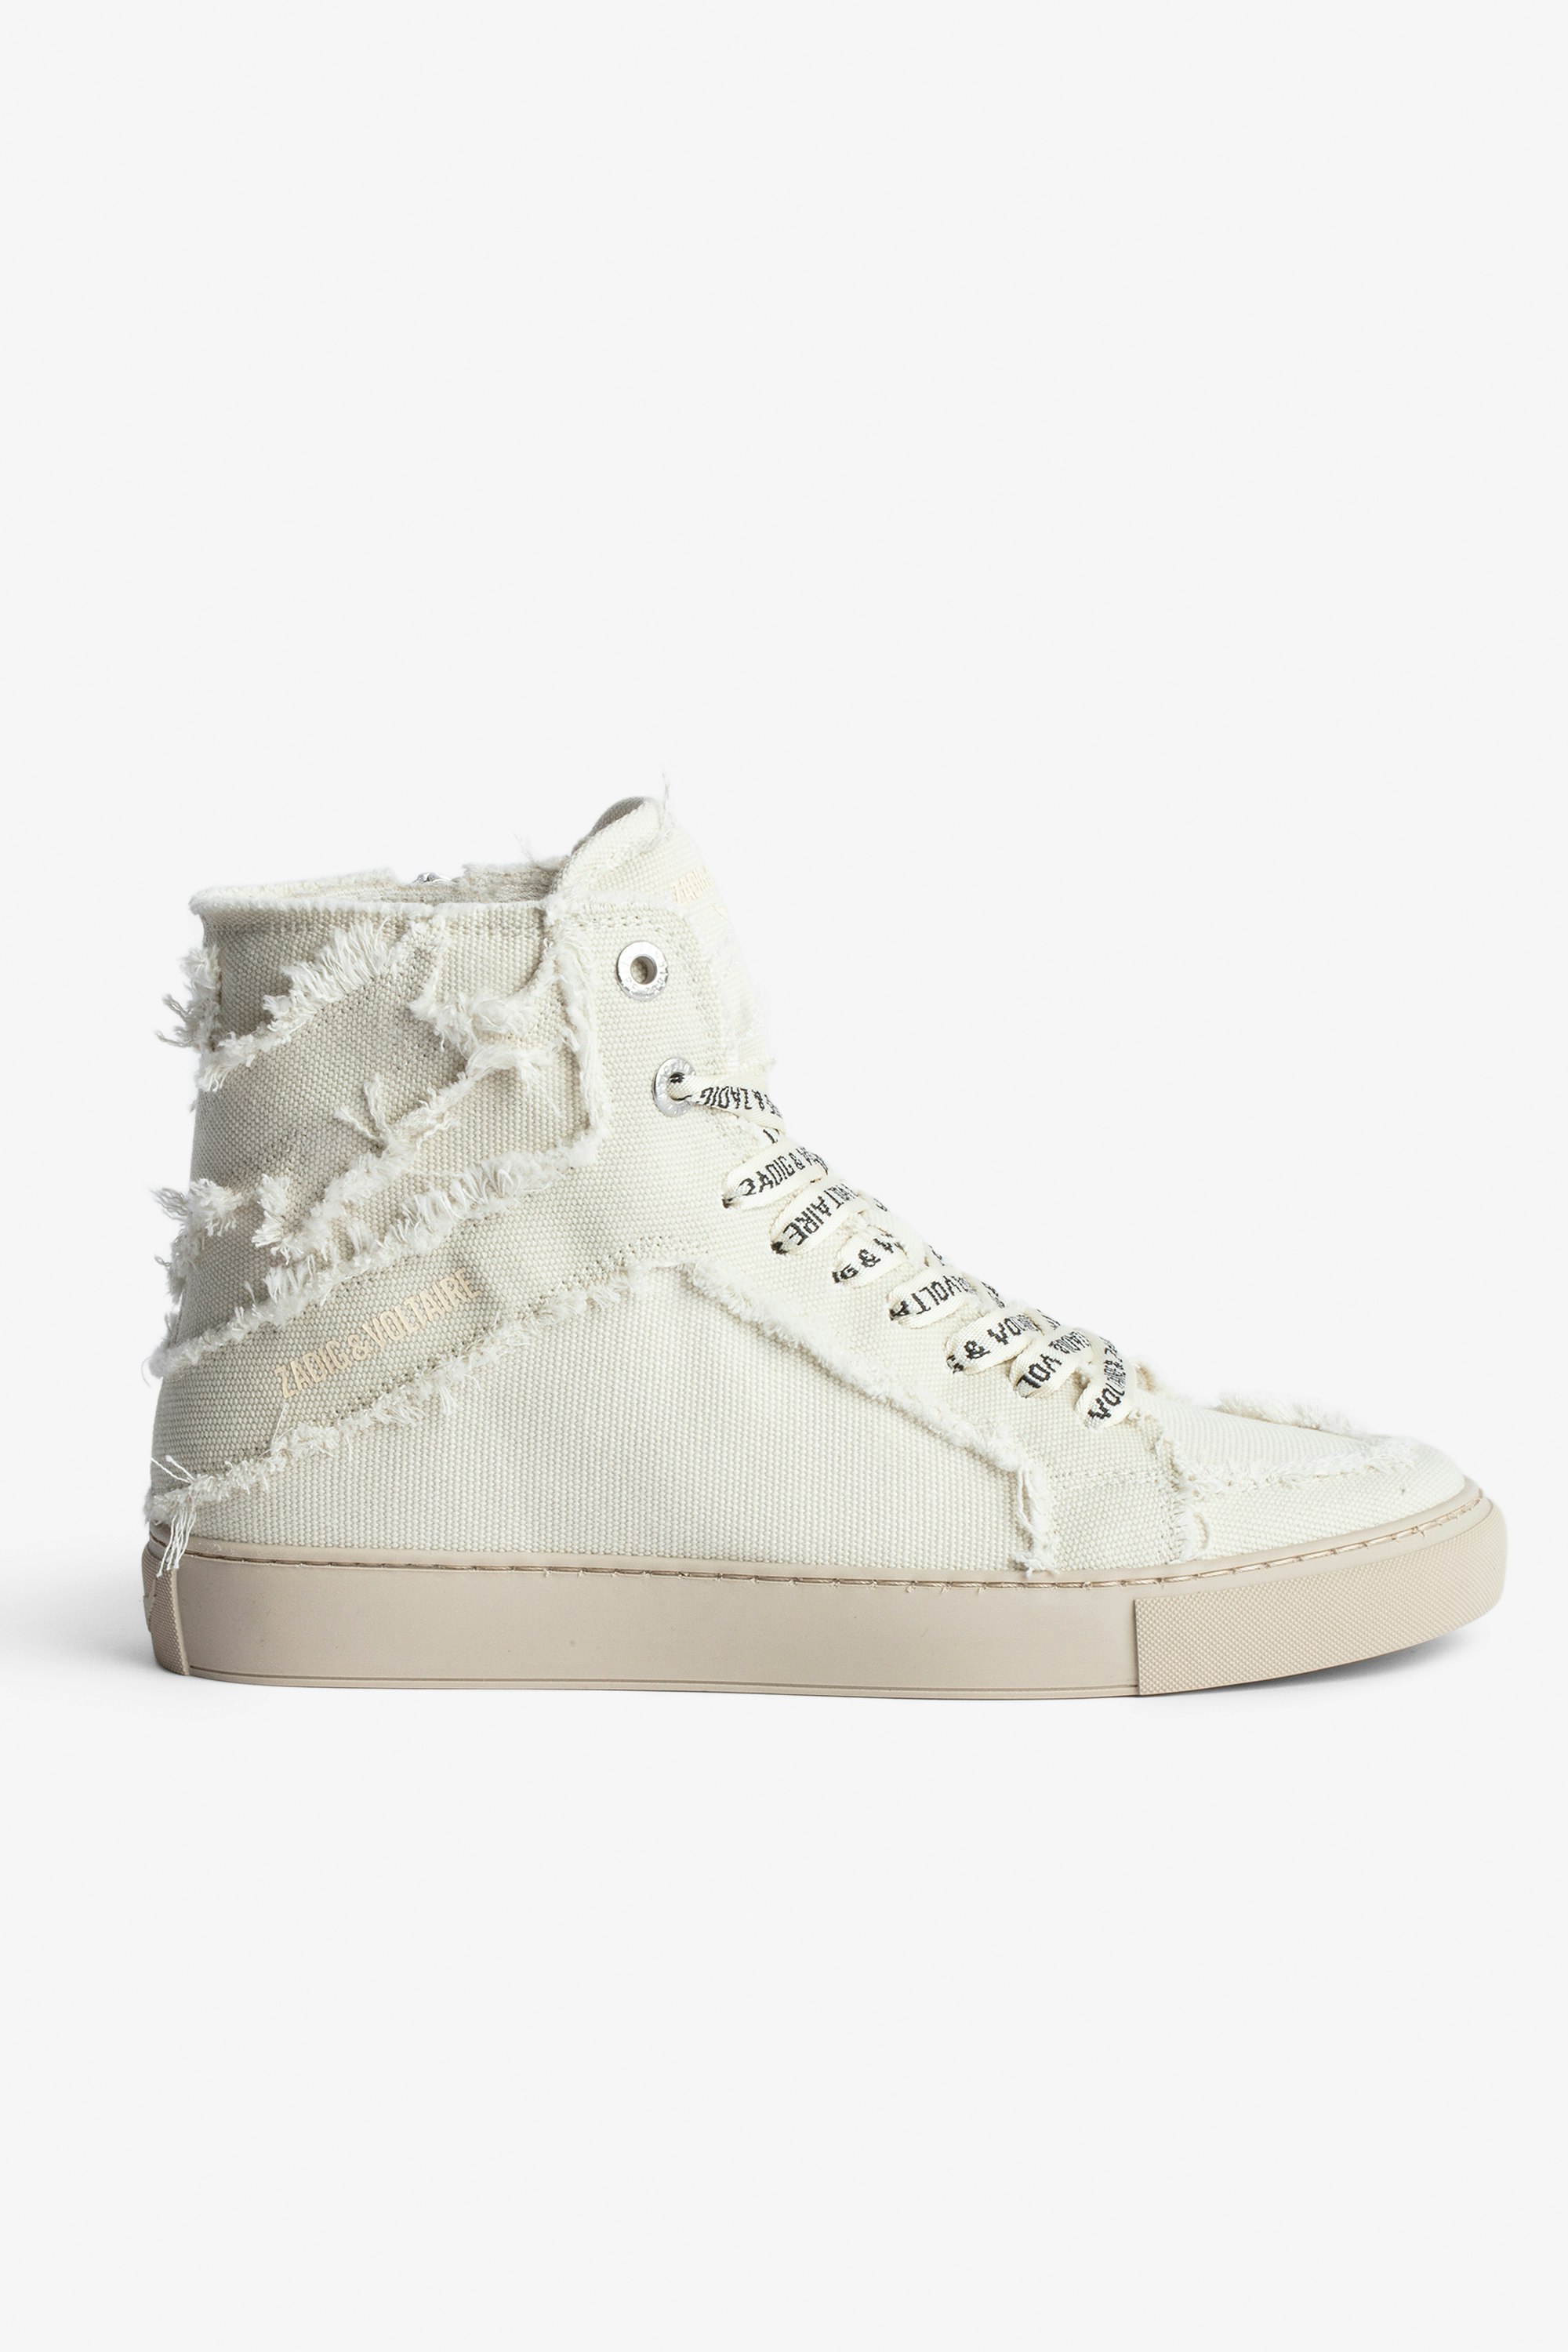 ZV1747 High Flash High-Top Trainers Women's high-top trainers in ecru cotton canvas